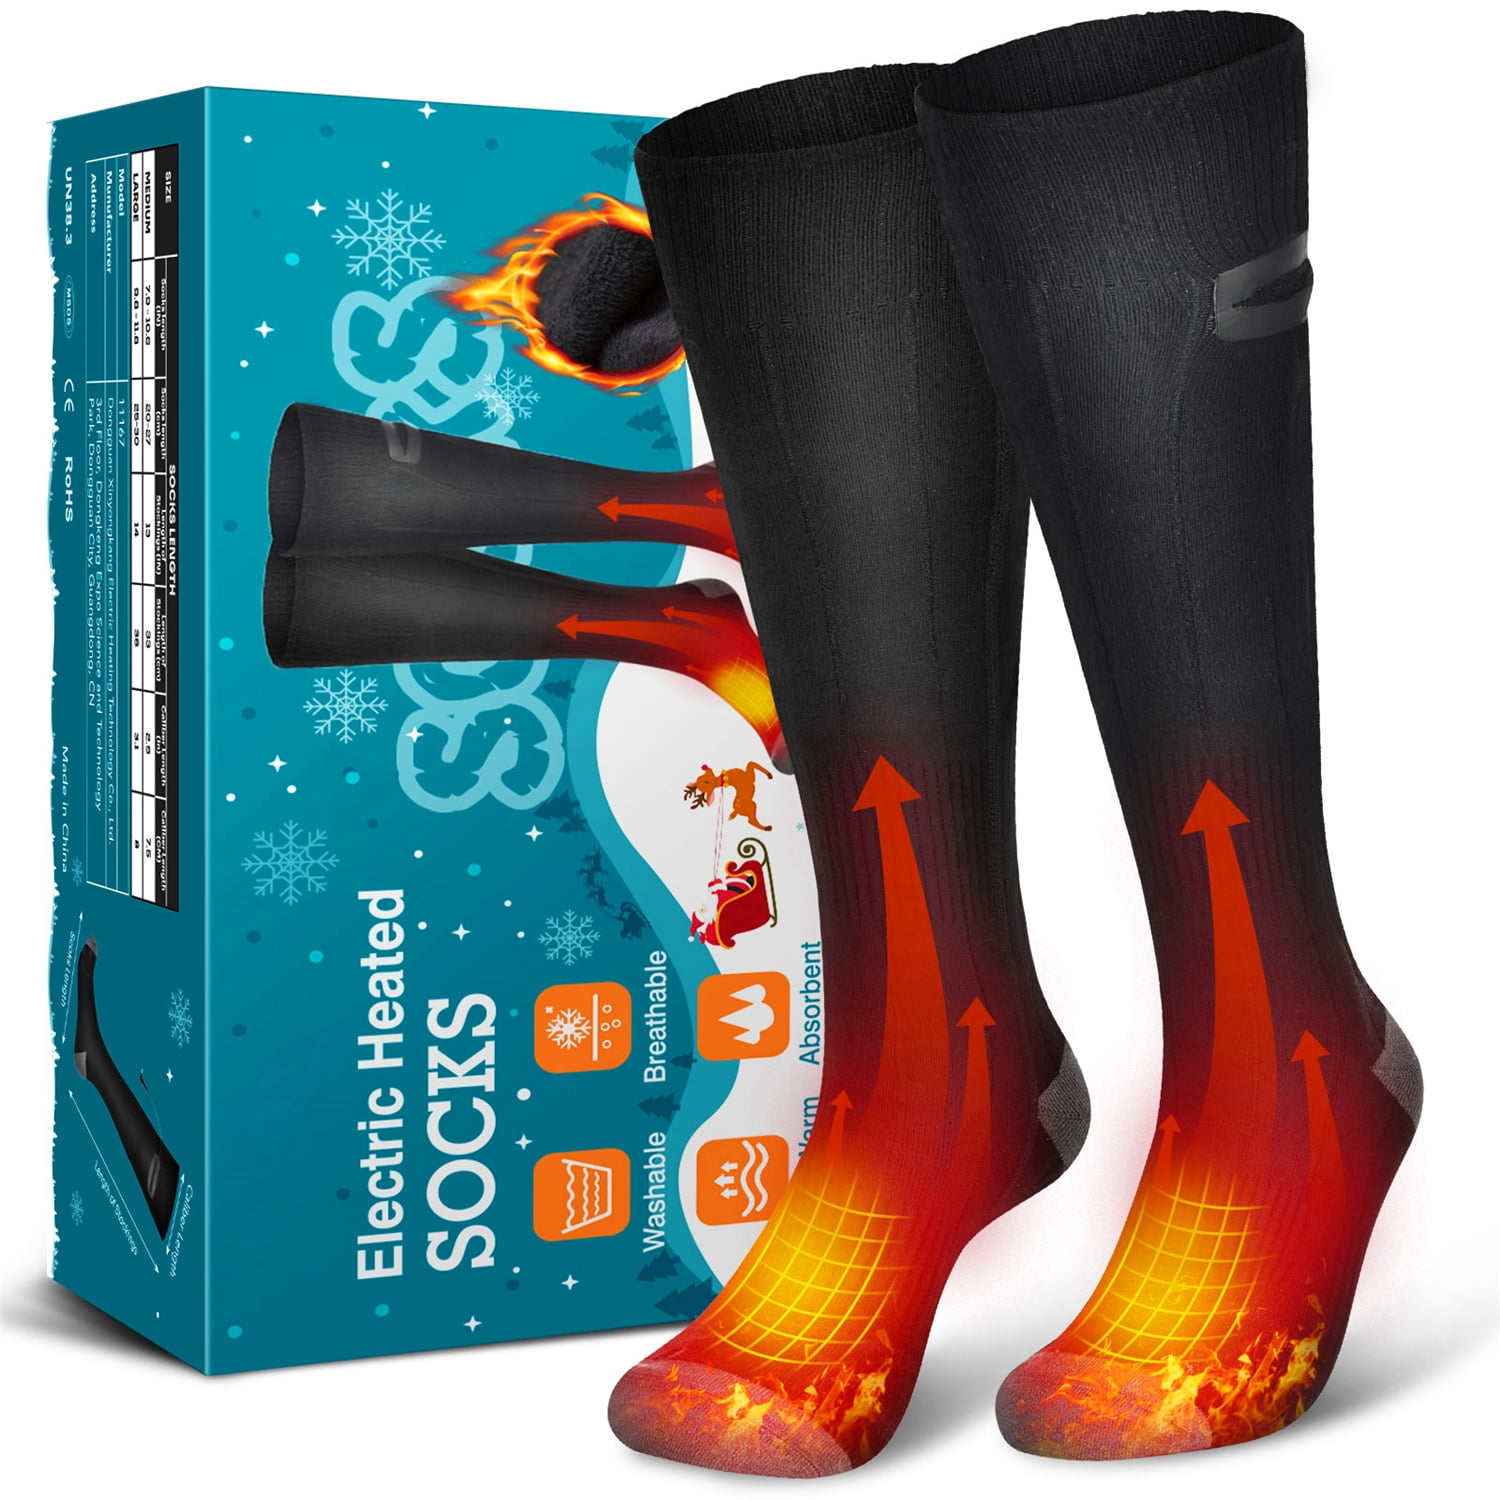 Upgraded Heated Socks Electric Rechargeable Battery 3 Levels Heating Settings Thermal Heating Sock for Men Women Camping Foot Warmers for Riding,Skiing,Motorcycling,Shoveling Snow 